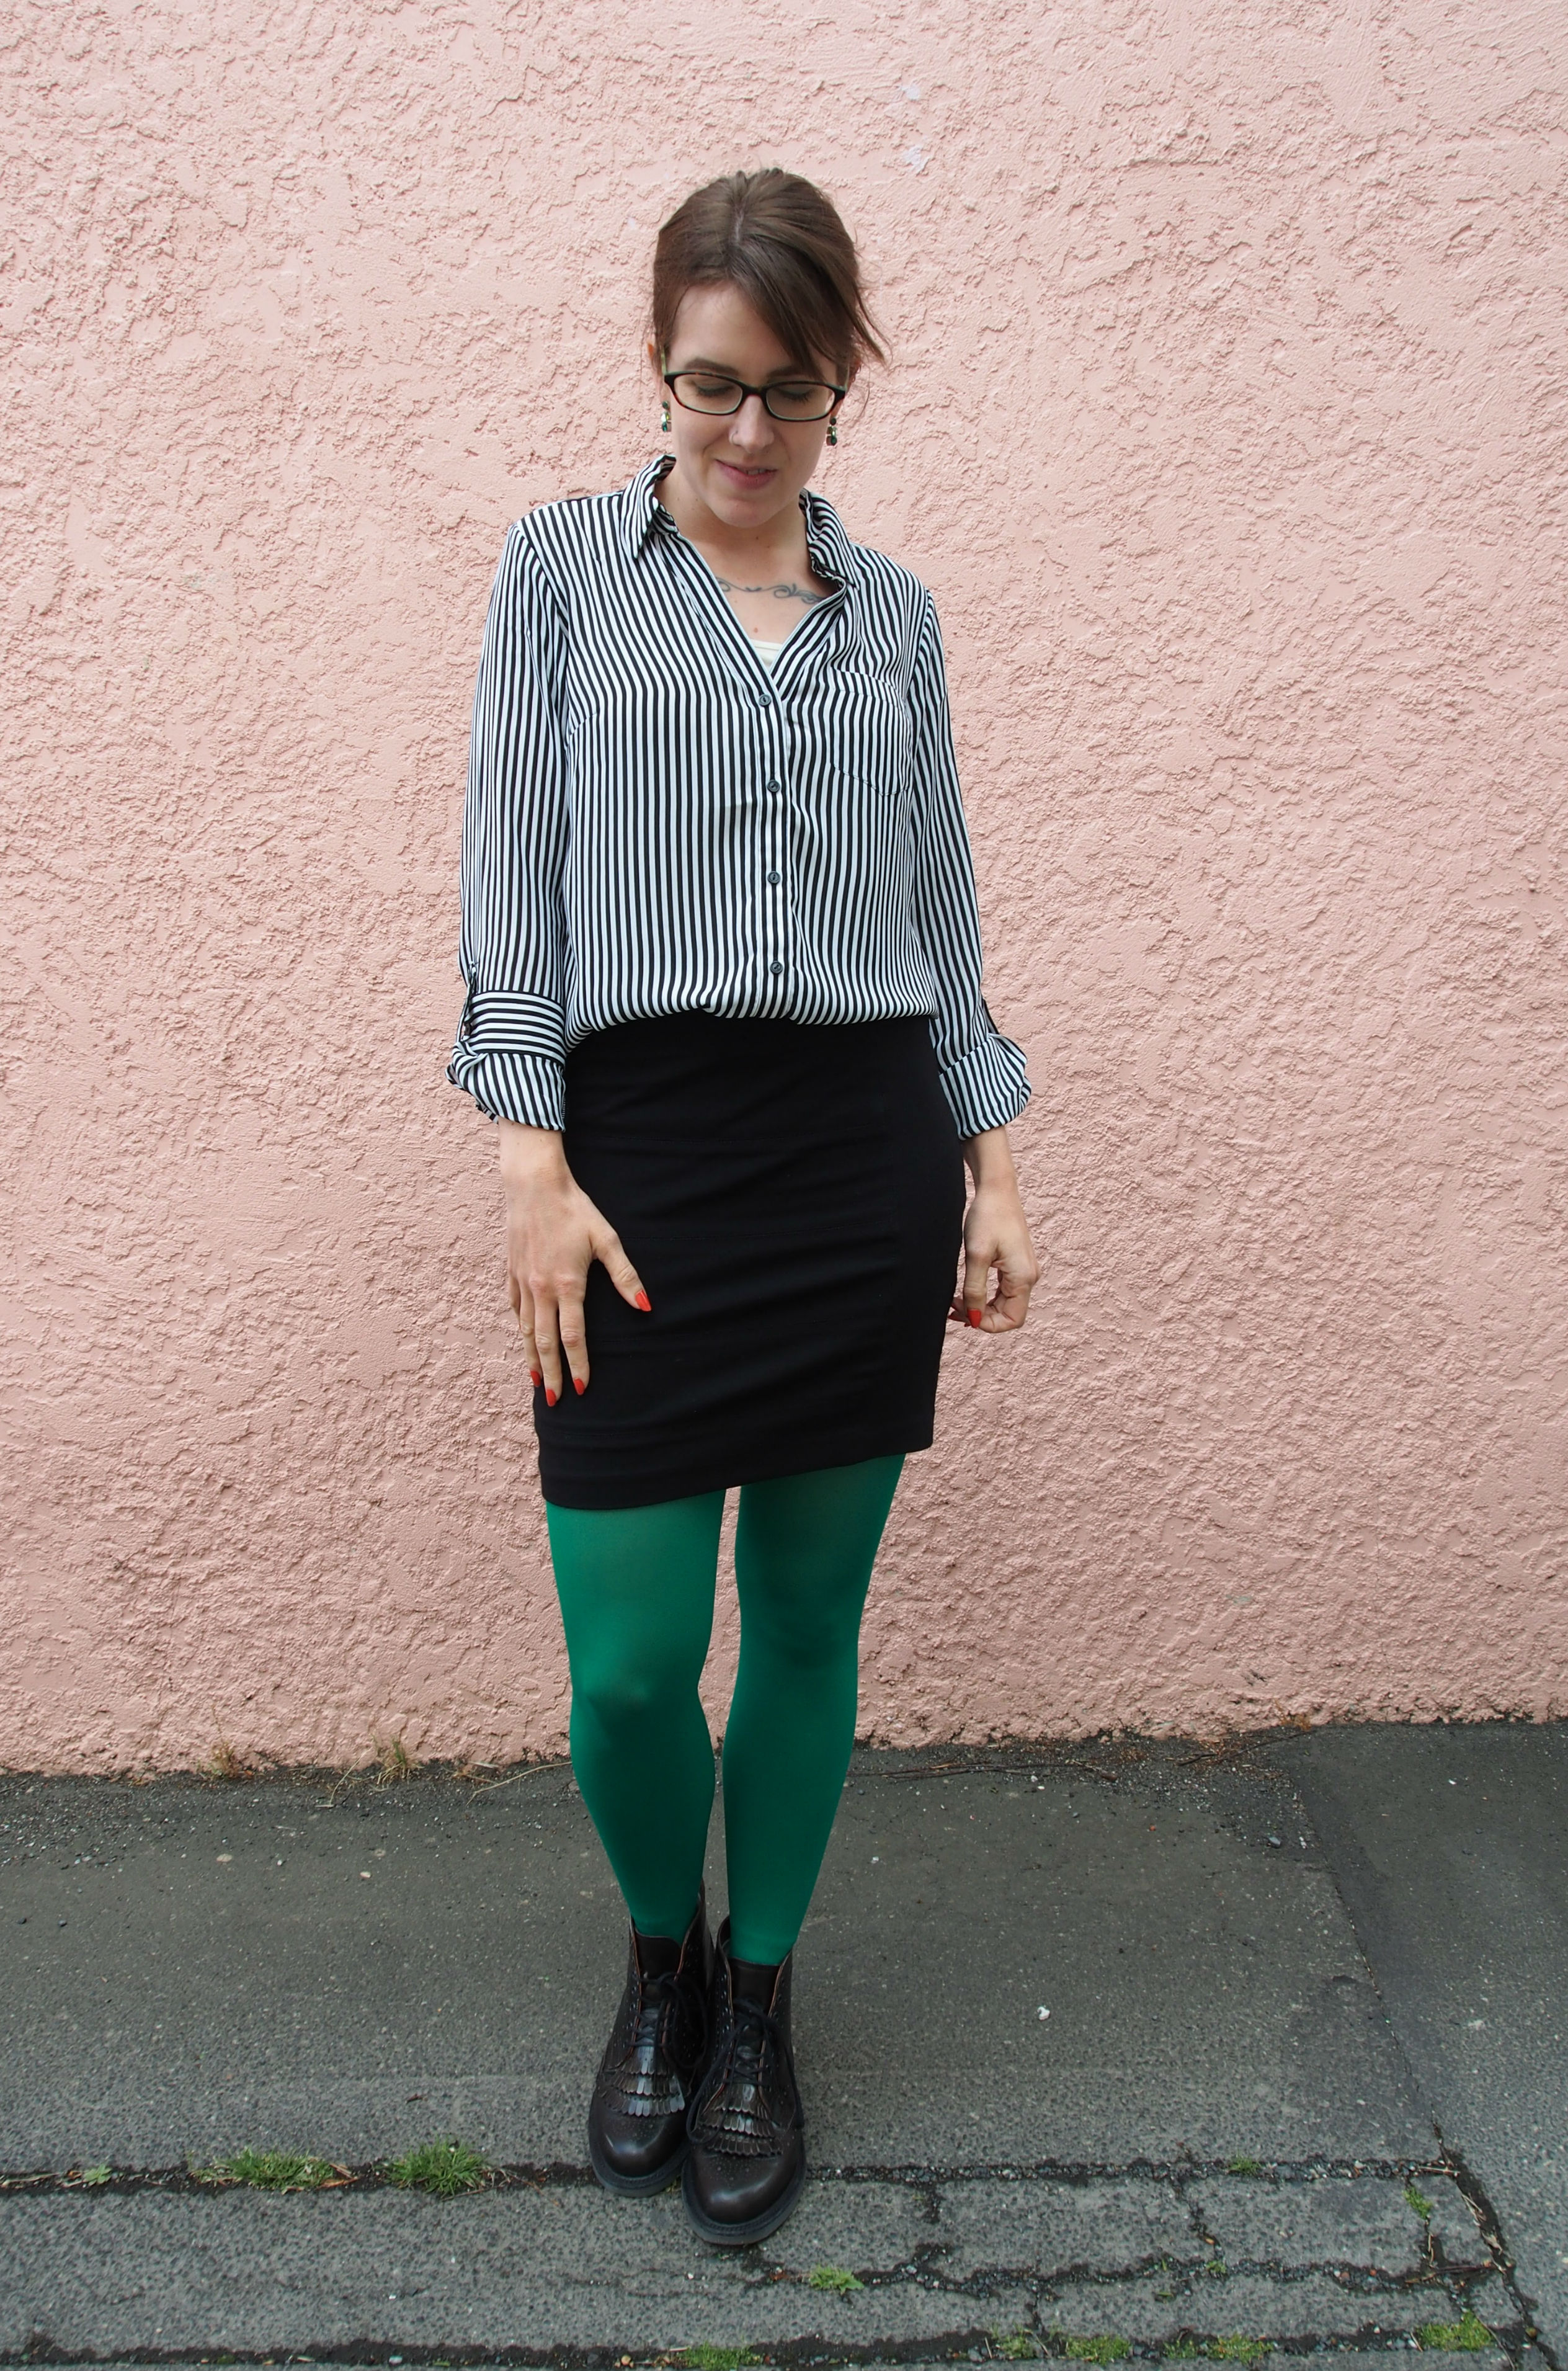 OOTD: Business casual – Idealism never 